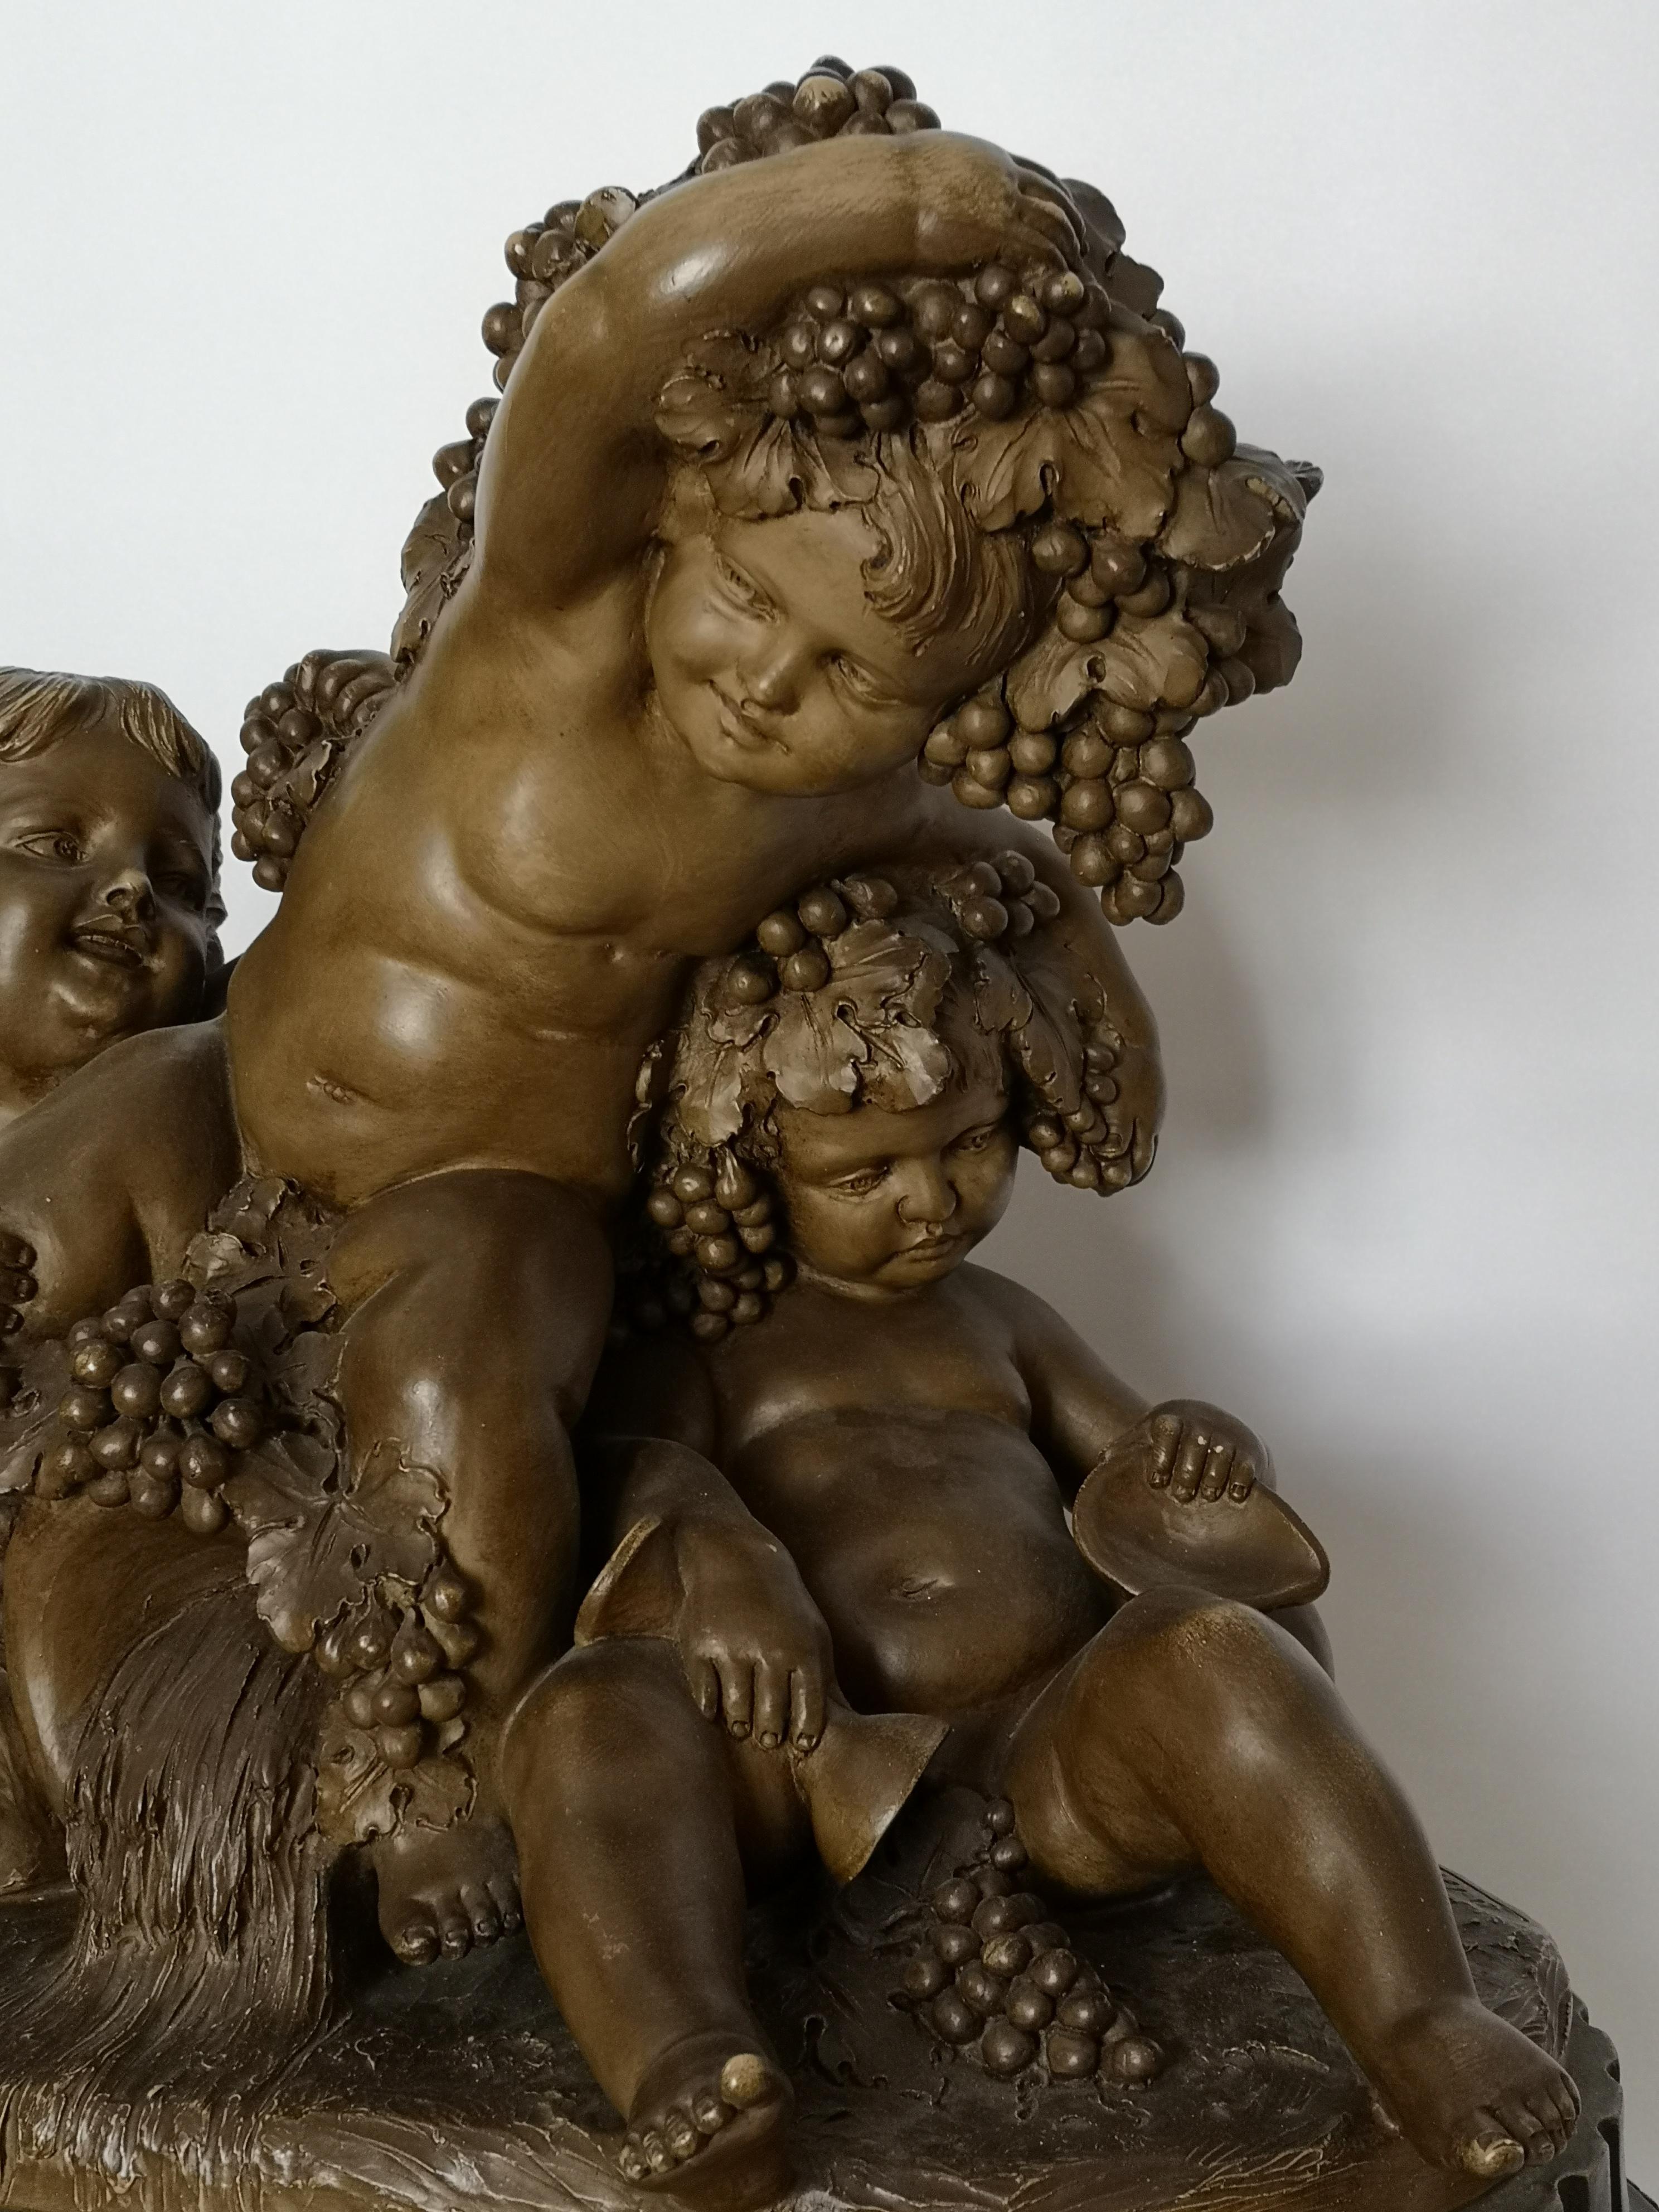 This large 19th century French terracotta group shows three young putti, one slumped back with a goblet spilling grapes depicting wine. The others look more joyful and are both holding grape vines. In the centre there's an amphora gushing out water,